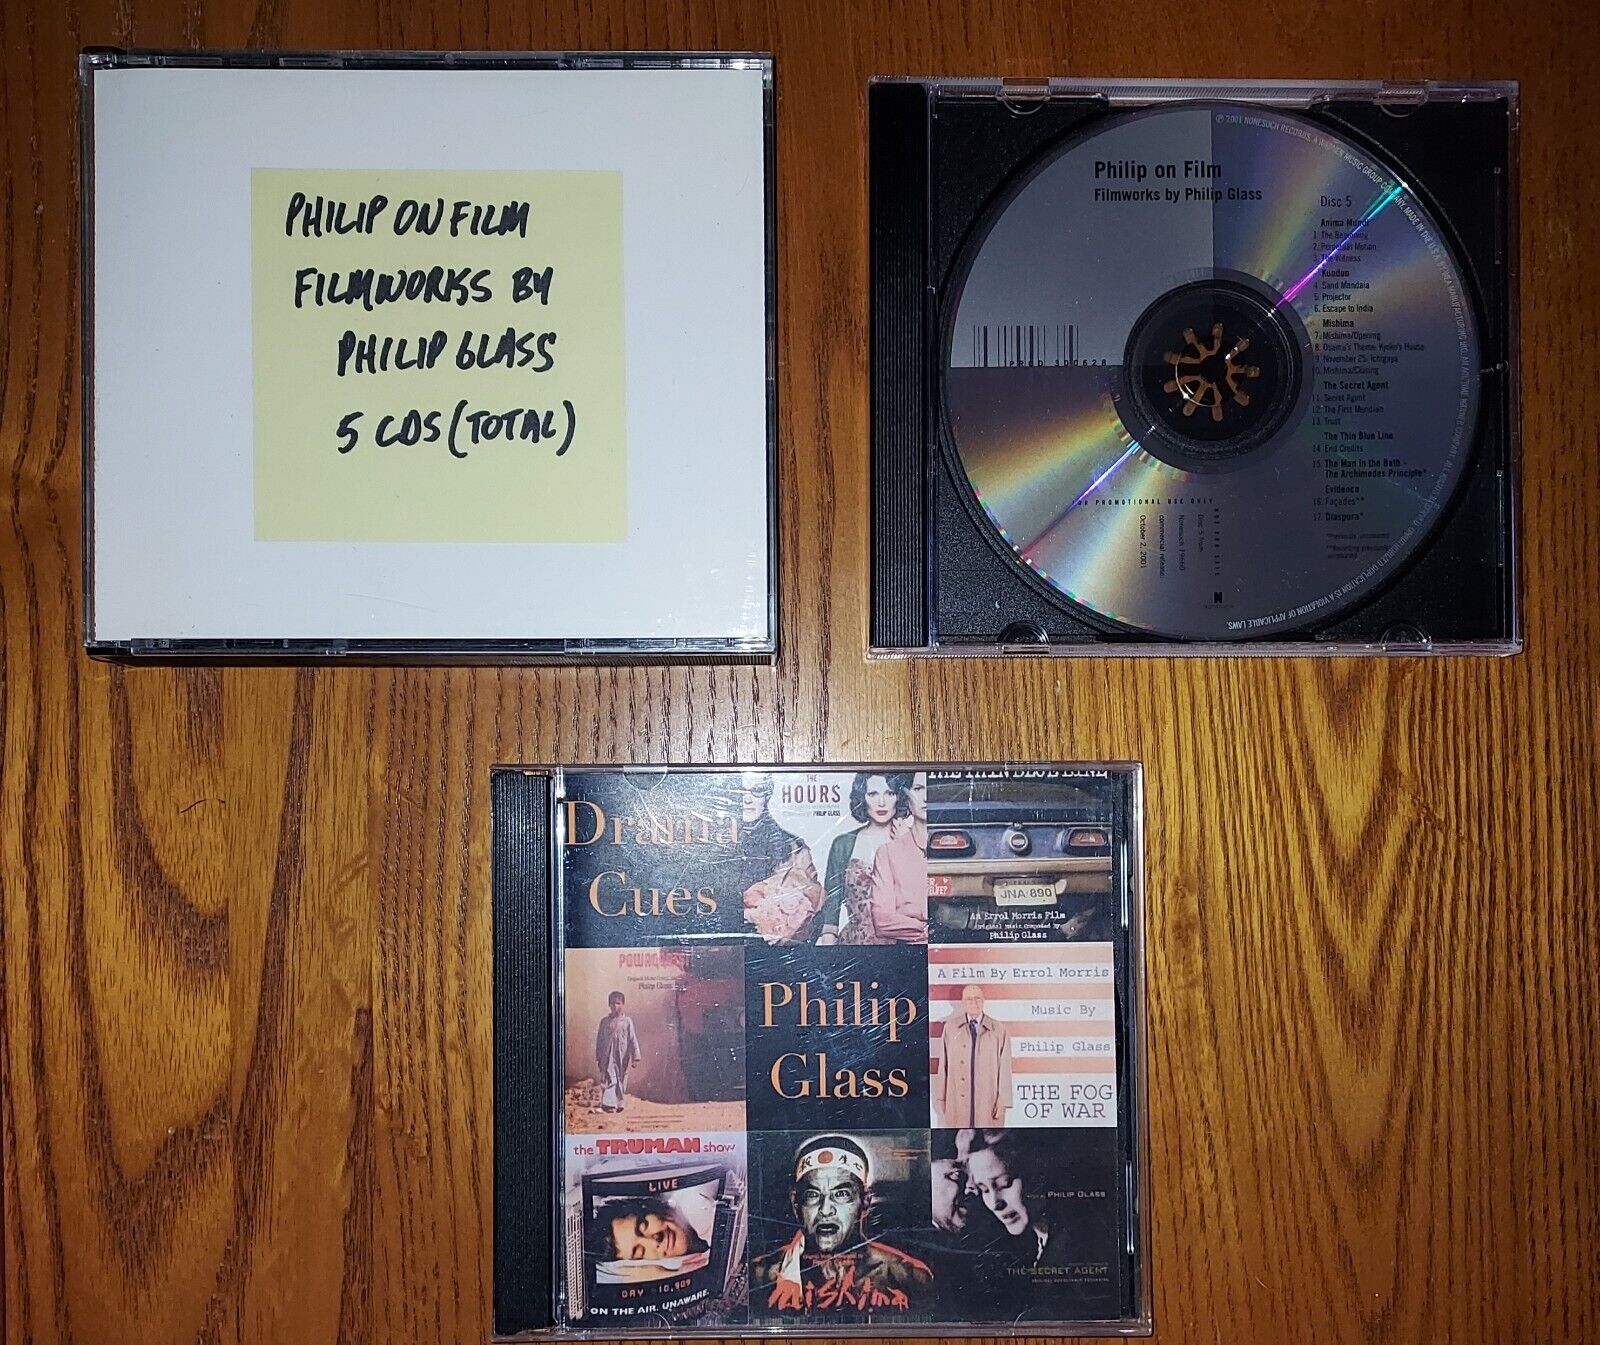 PHILIP GLASS 6 CDs Philip on Film PROMO Filmworks by Philip Glass+ Drama Cues VG